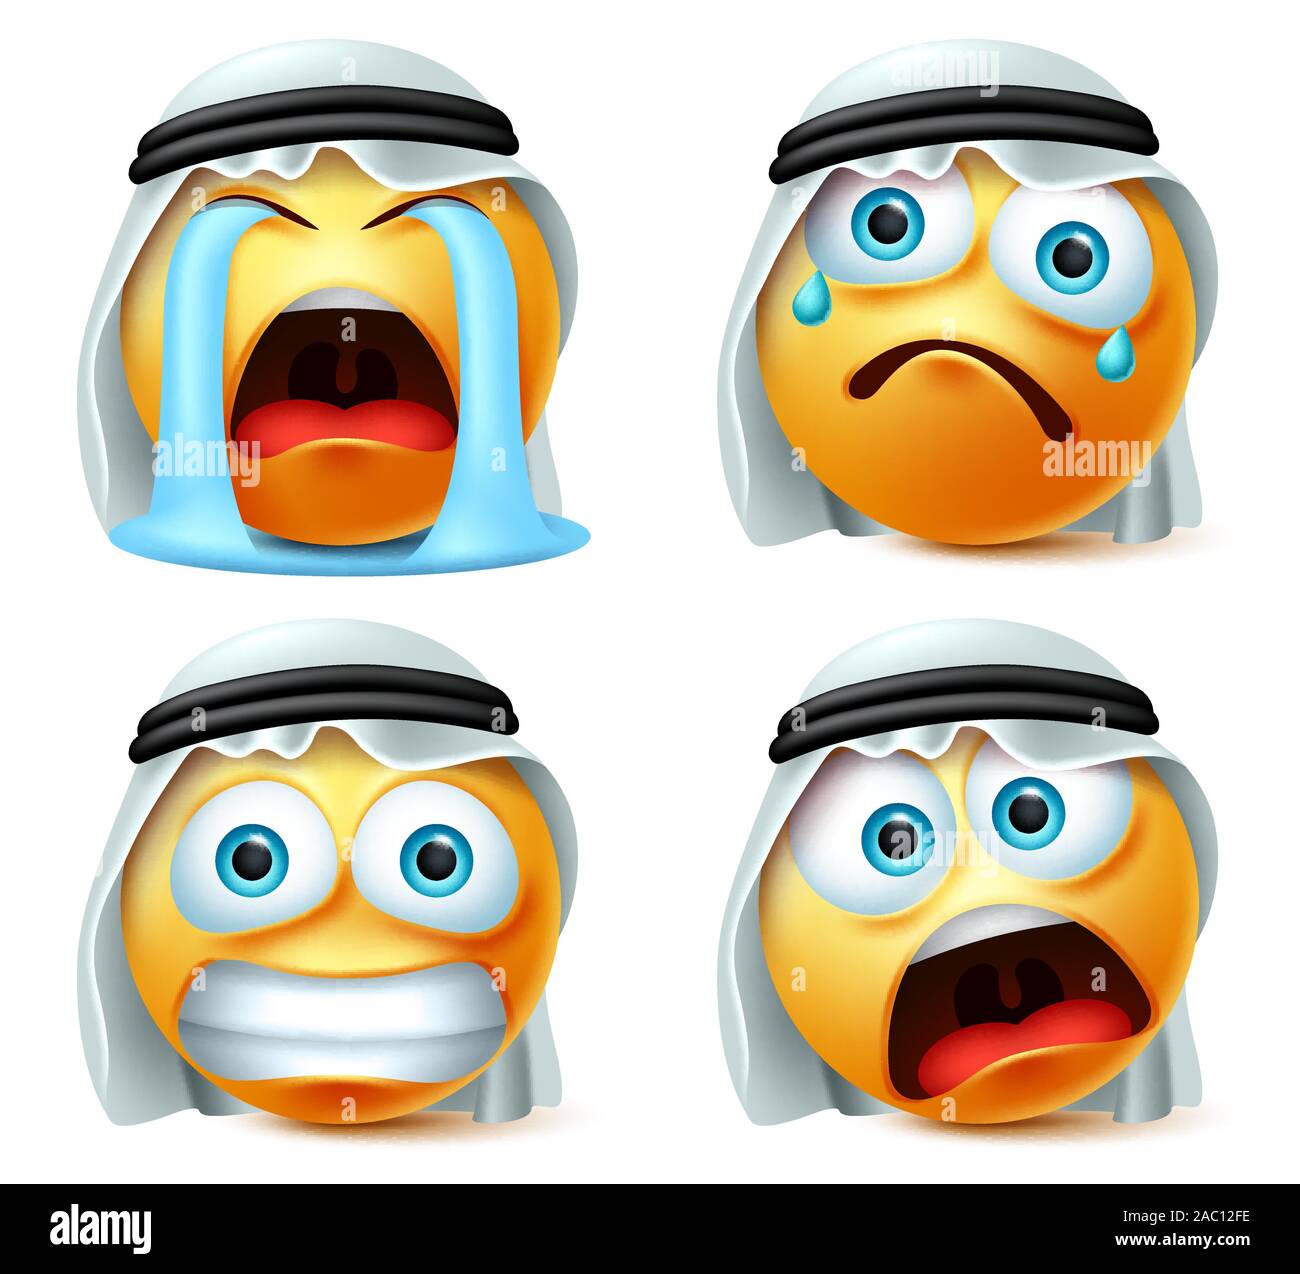 Smiley arab crying emoji vector set. Saudi arab emoticon or smiley yellow face in crying, scared, surprise and sad emotion with white traditional. Stock Vector